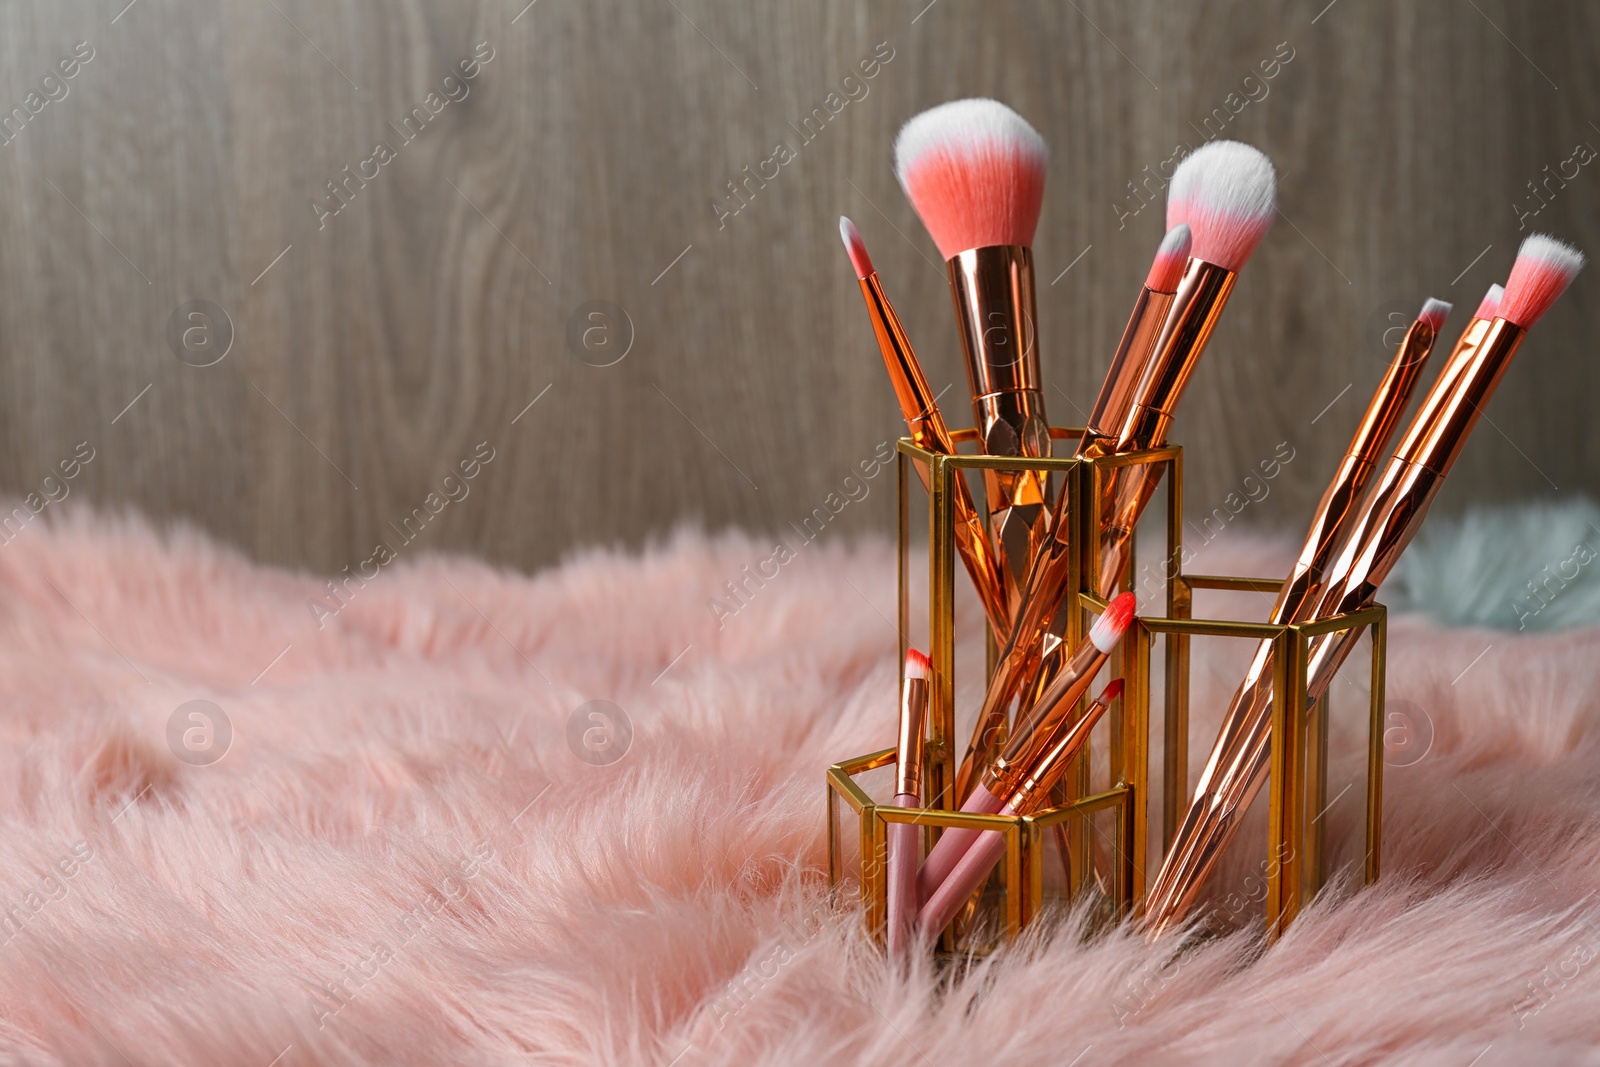 Photo of Organizer with set of professional makeup brushes on furry fabric against wooden background. Space for text